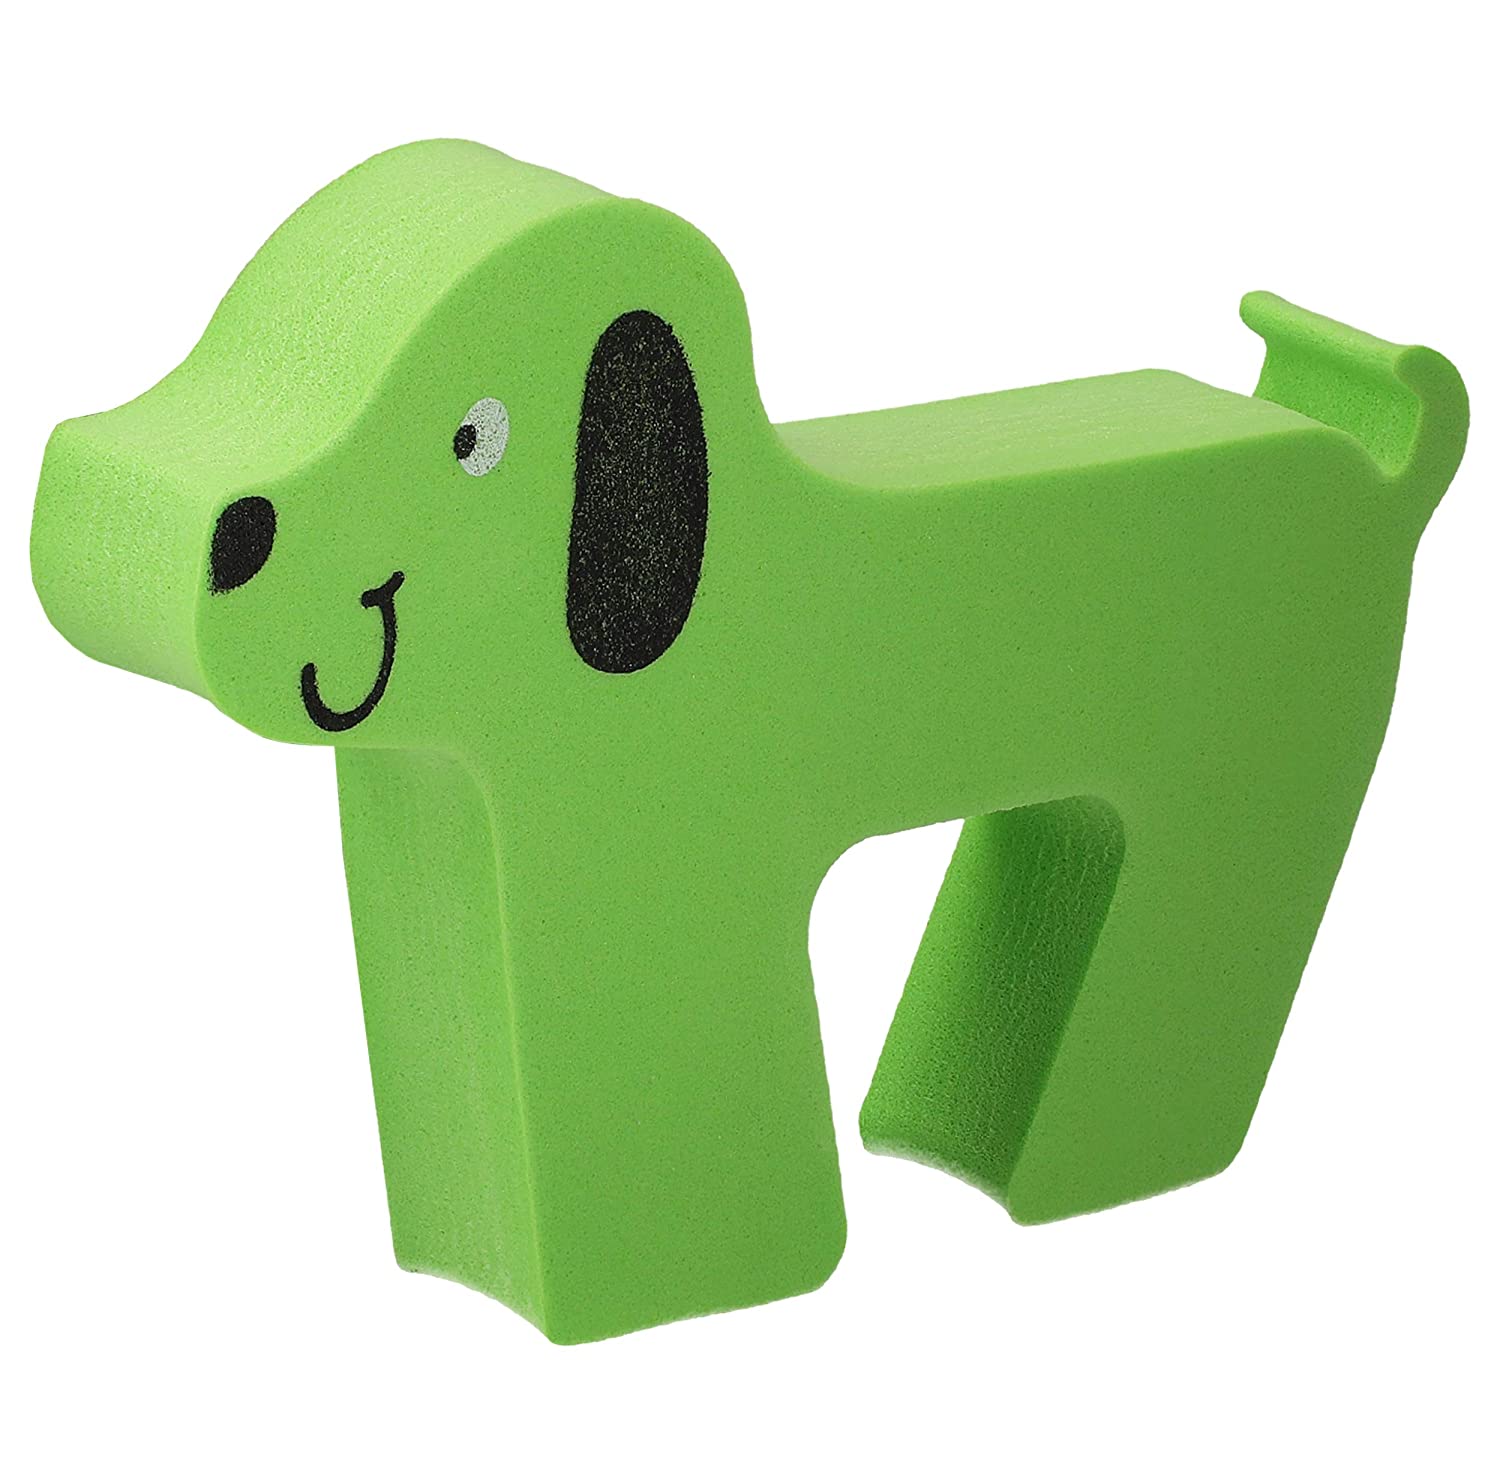 High Quality Door Stopper Clamping Protection for Doors and Windows Plastic Green Dog